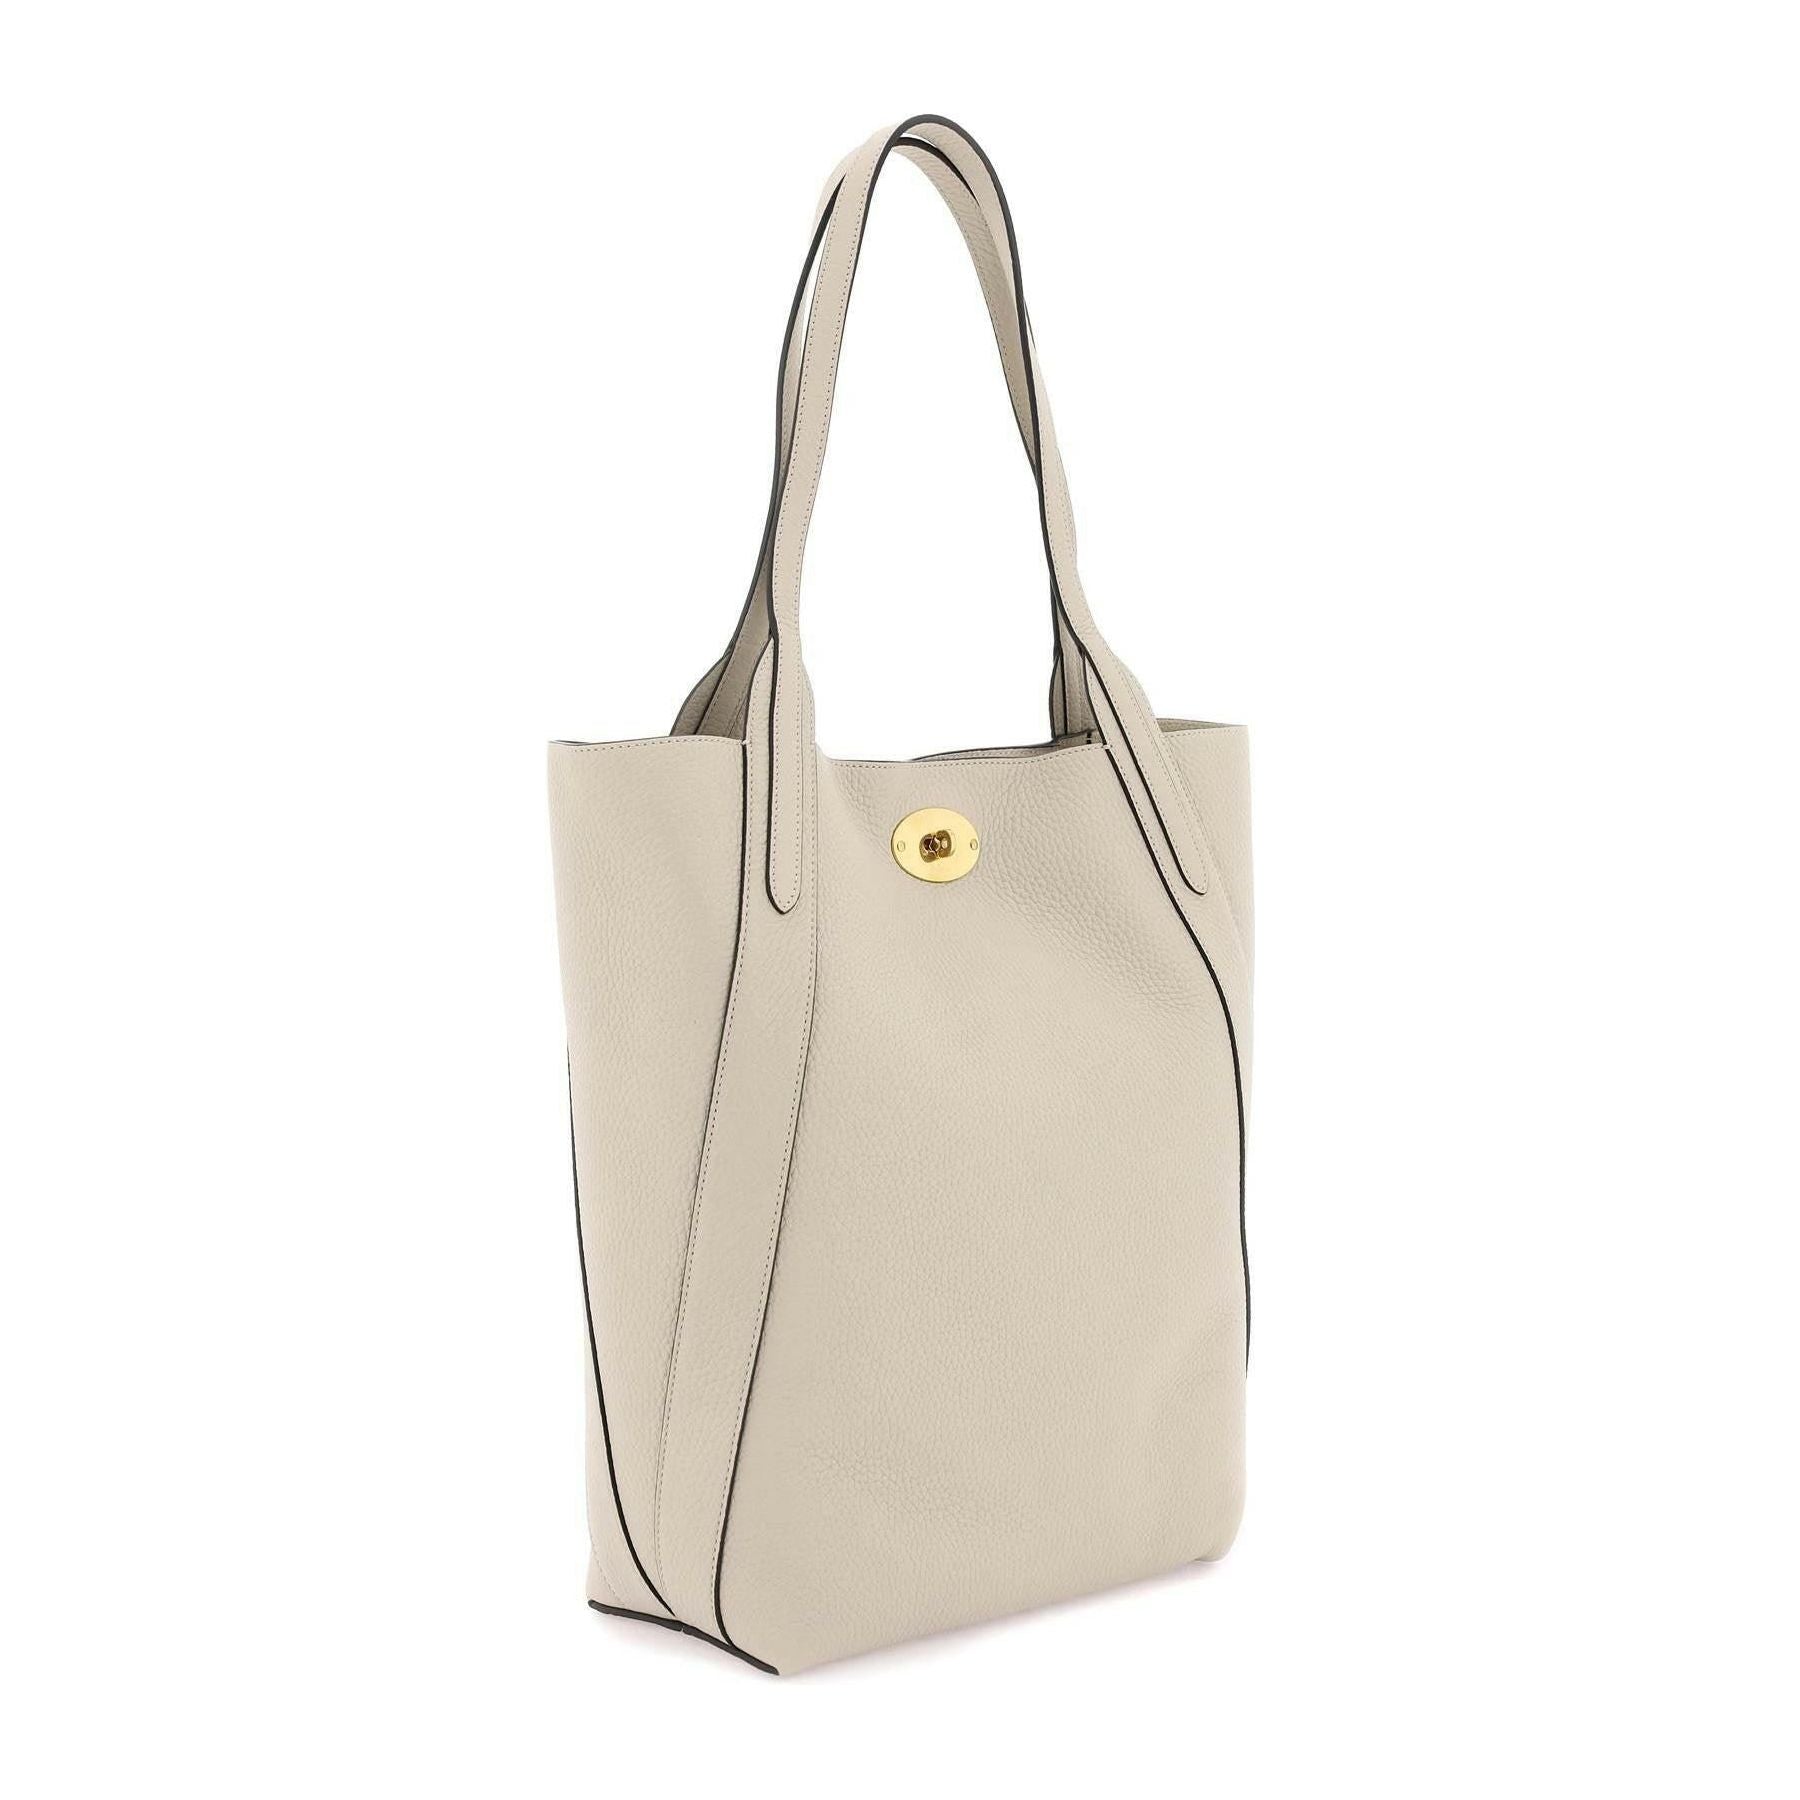 Grained Leather Bayswater Tote Bag MULBERRY JOHN JULIA.